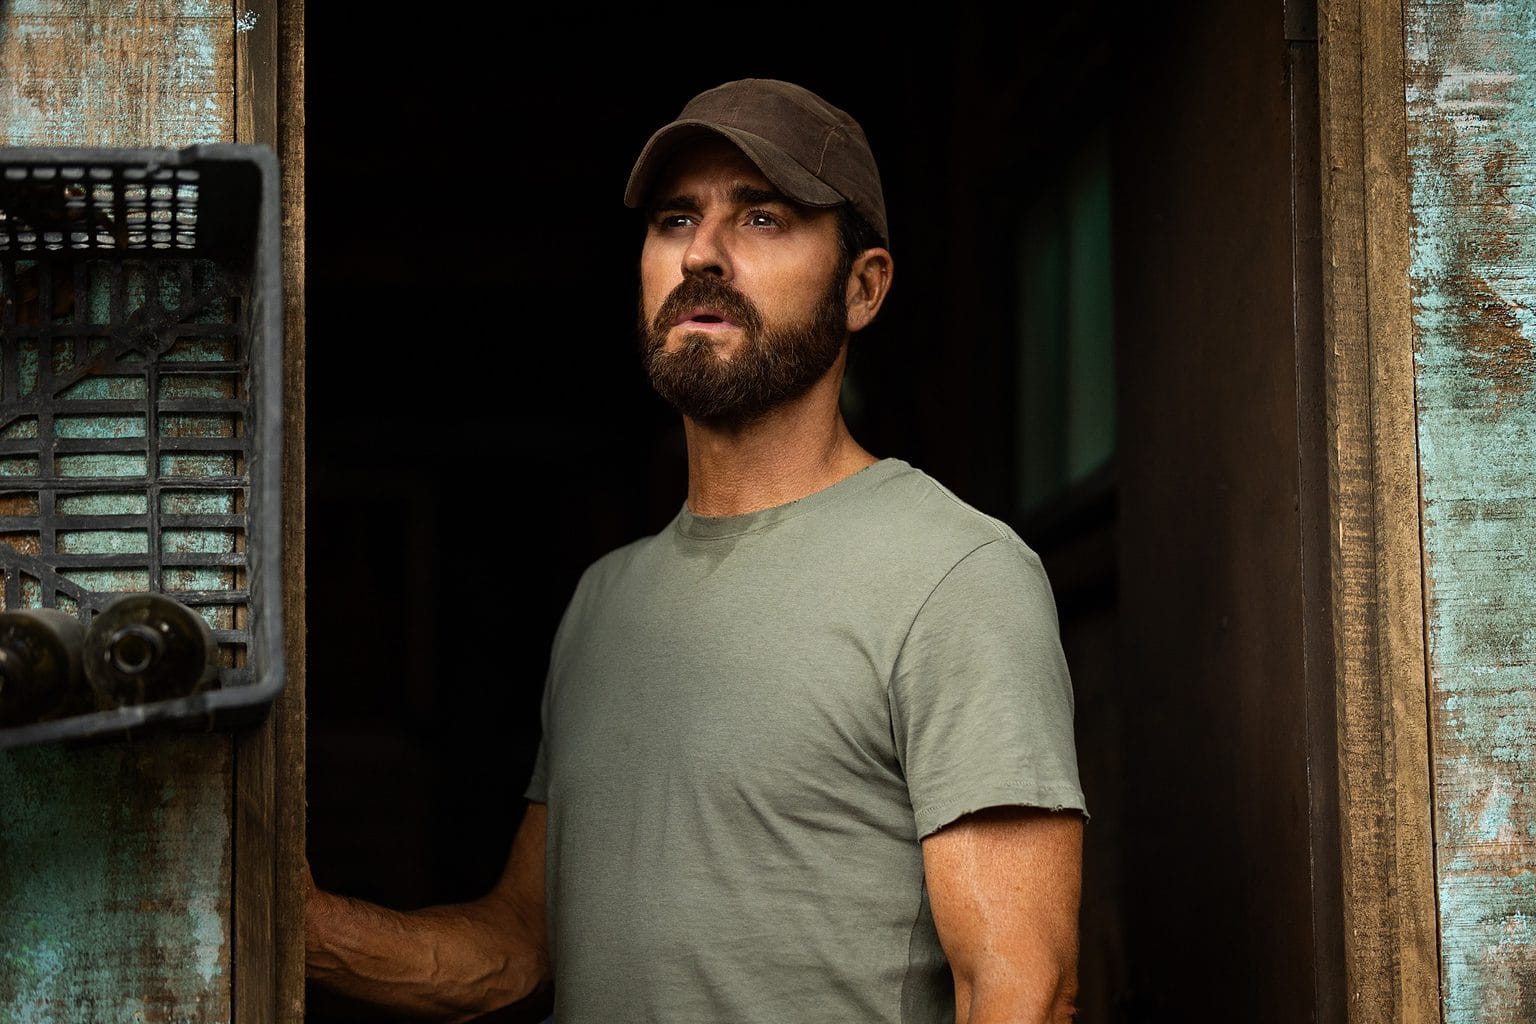 The Mosquito Coast season 2 recap Apple TV+: Allie Fox (played by Justin Theroux) comes clean to the kids -- mostly -- in the season two premiere.